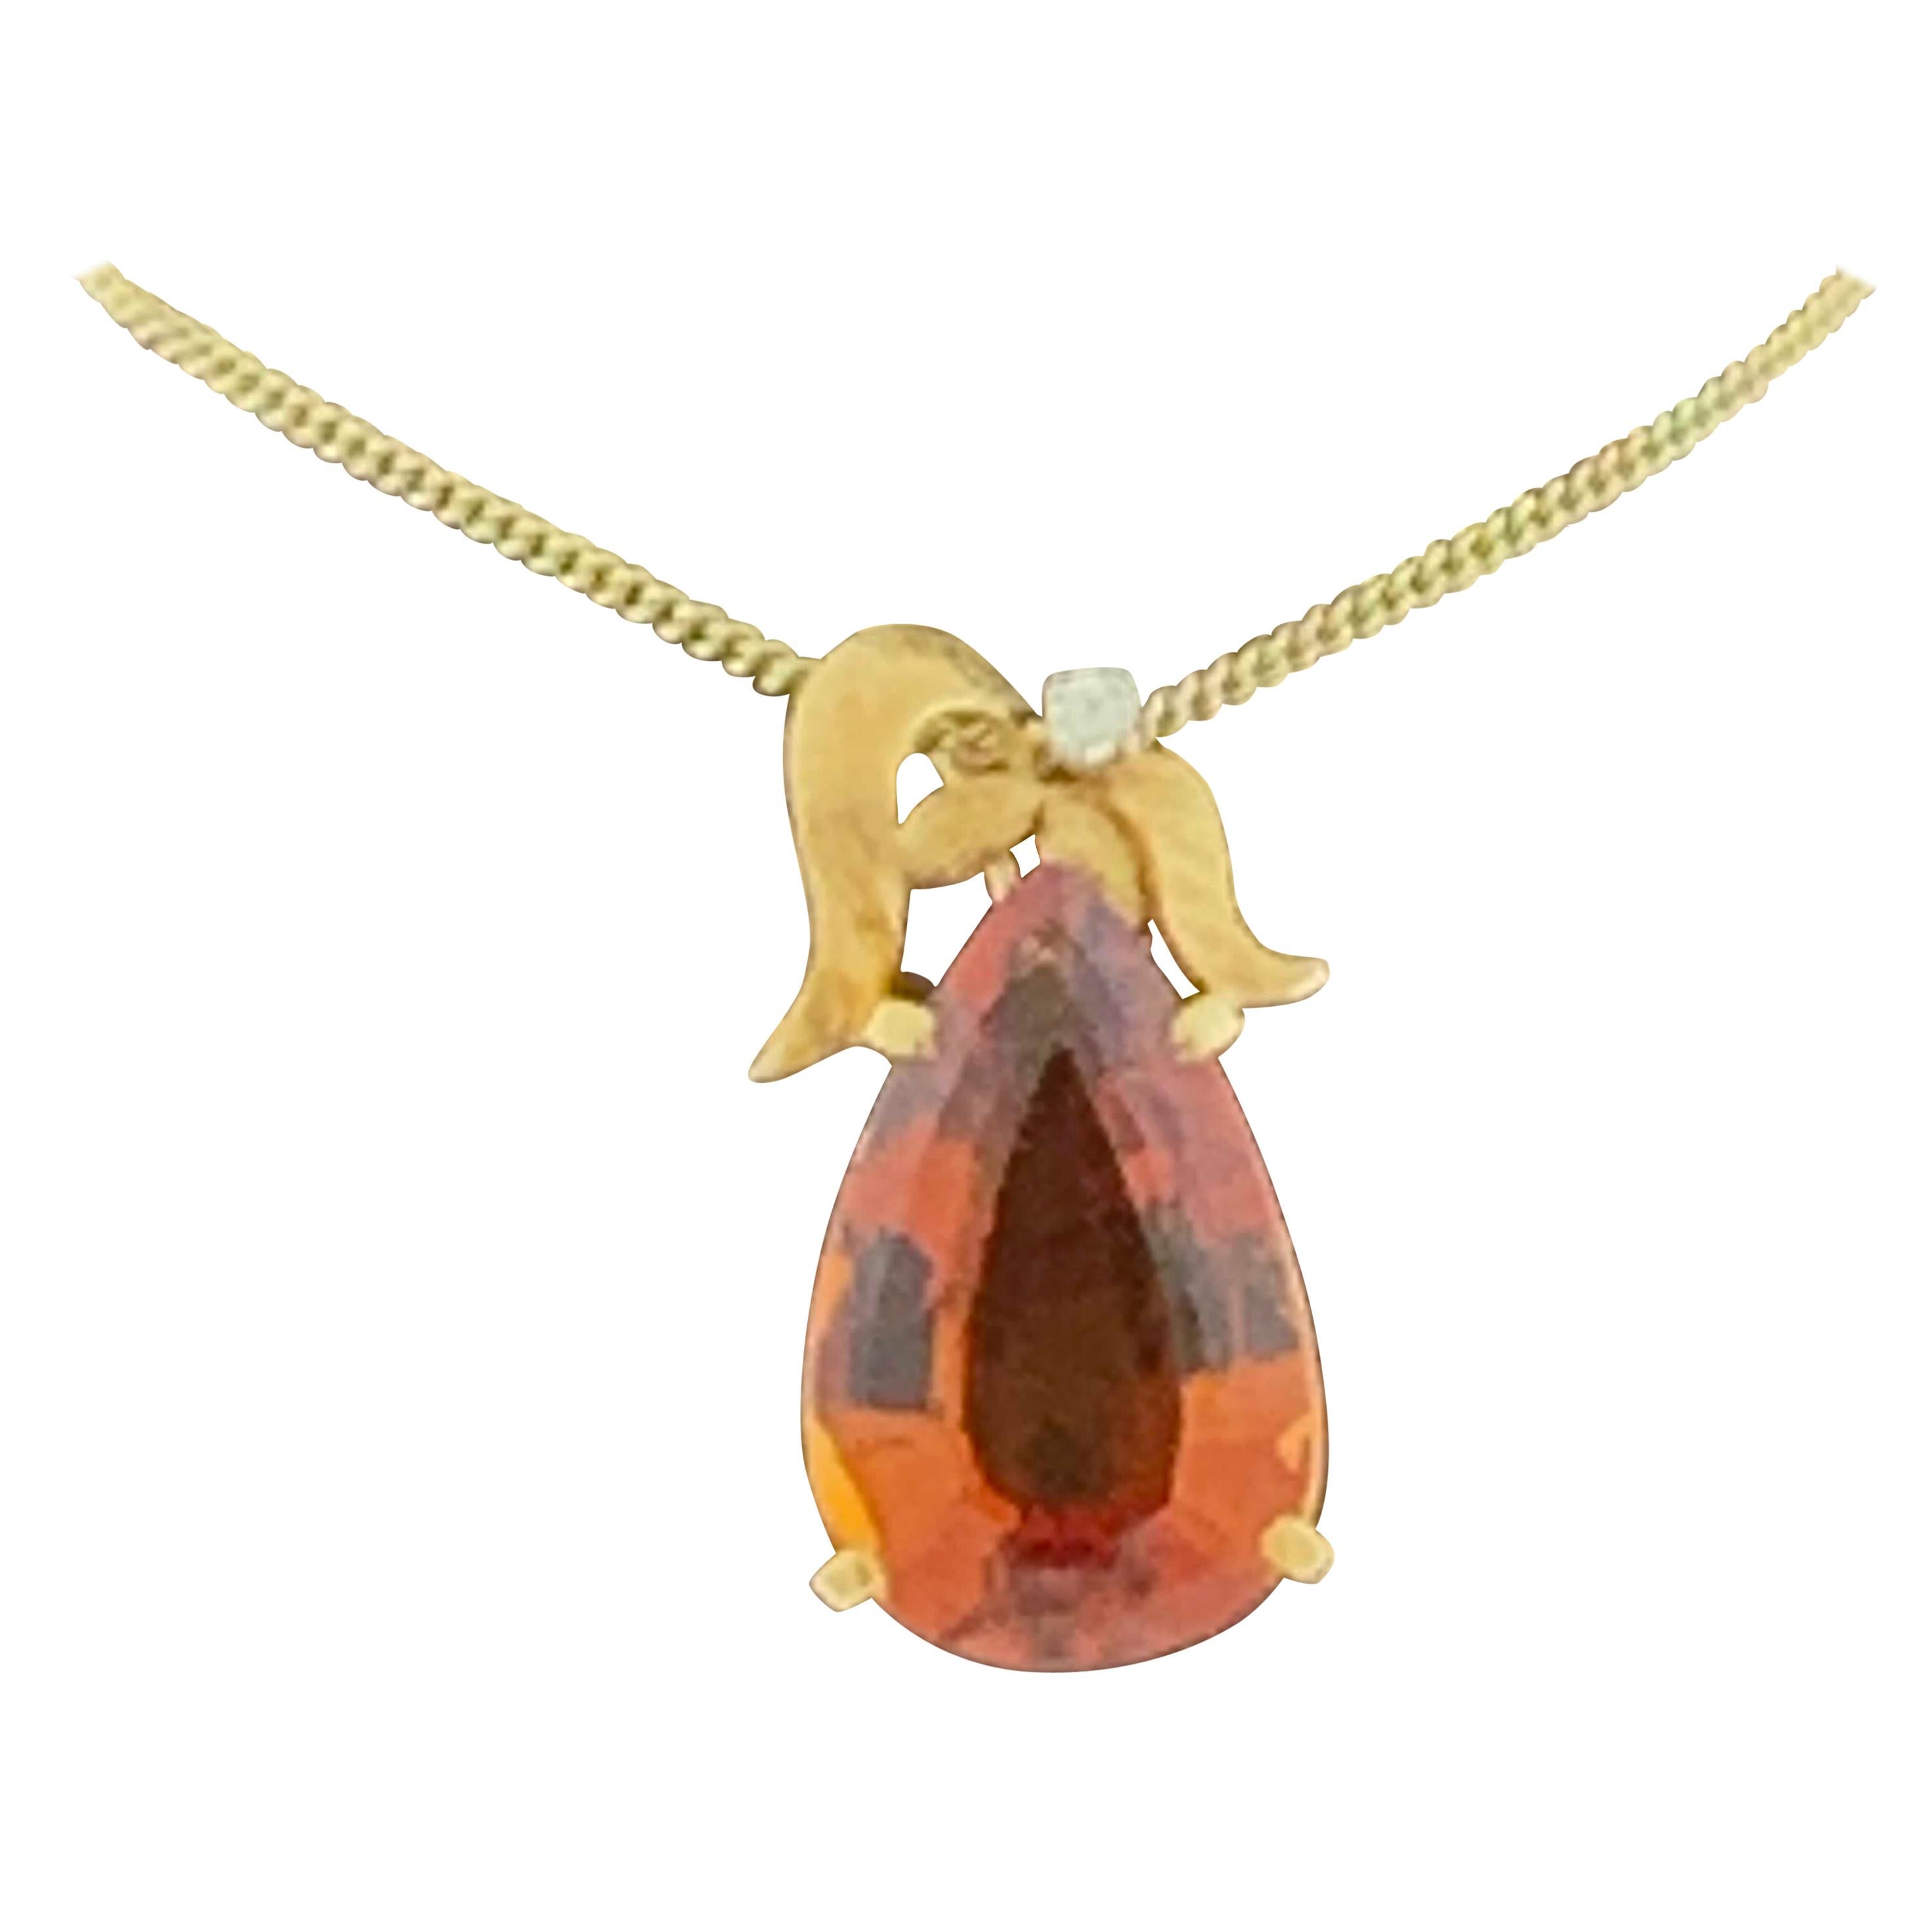 1970s Yellow Gold and Imperial Topaz Pendant Necklace by H Stern 18 Karat Gold